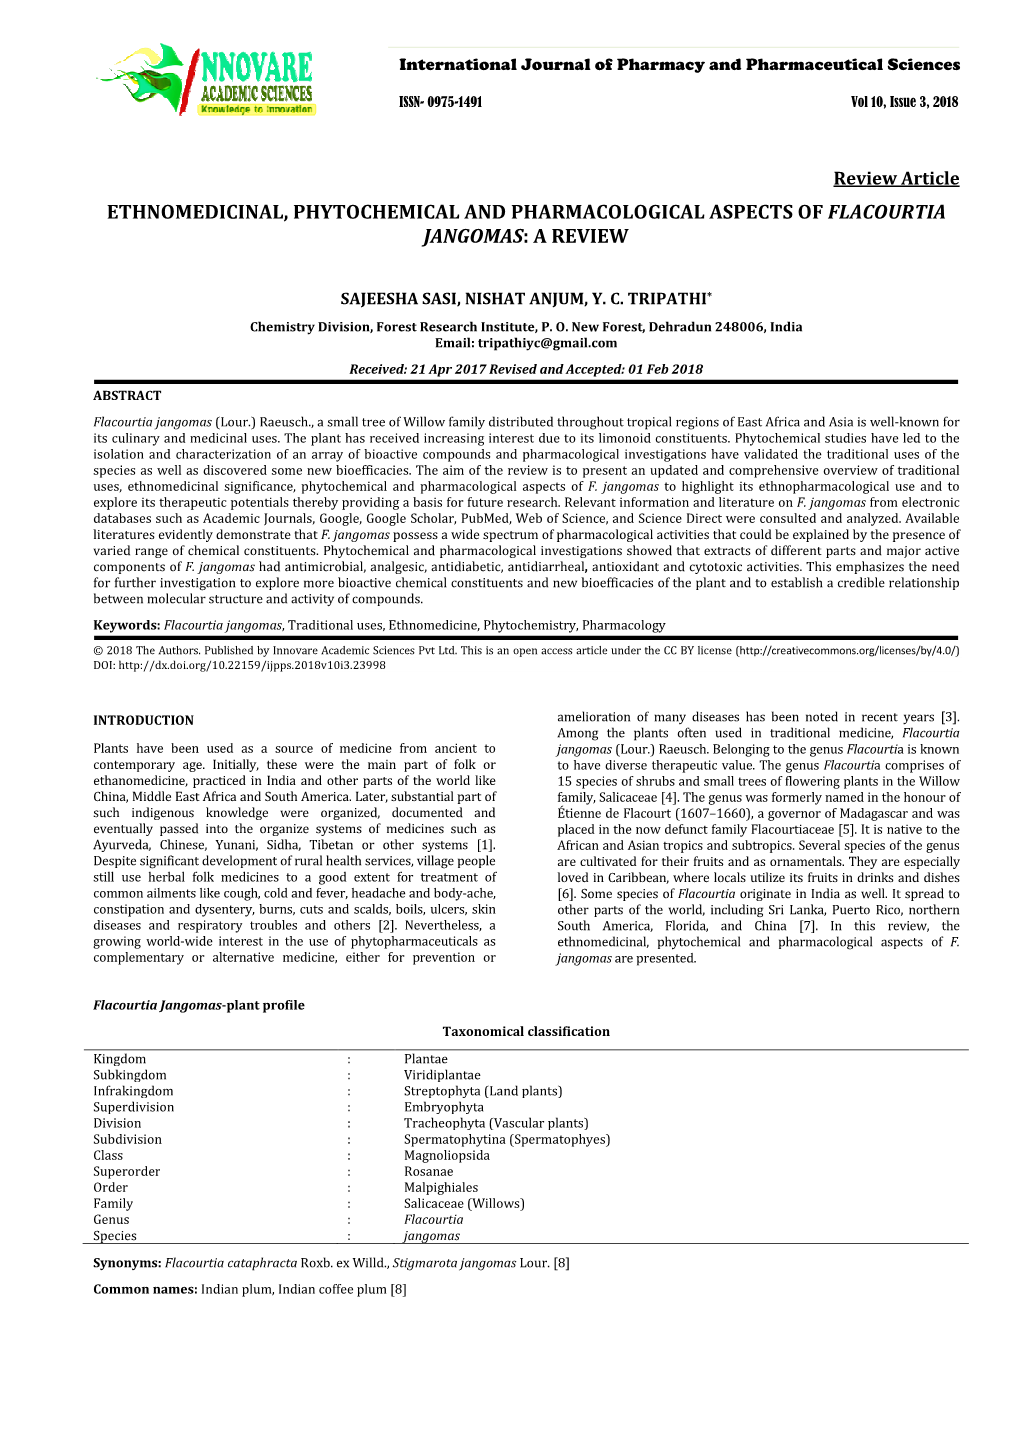 Ethnomedicinal, Phytochemical and Pharmacological Aspects of Flacourtia Jangomas: a Review